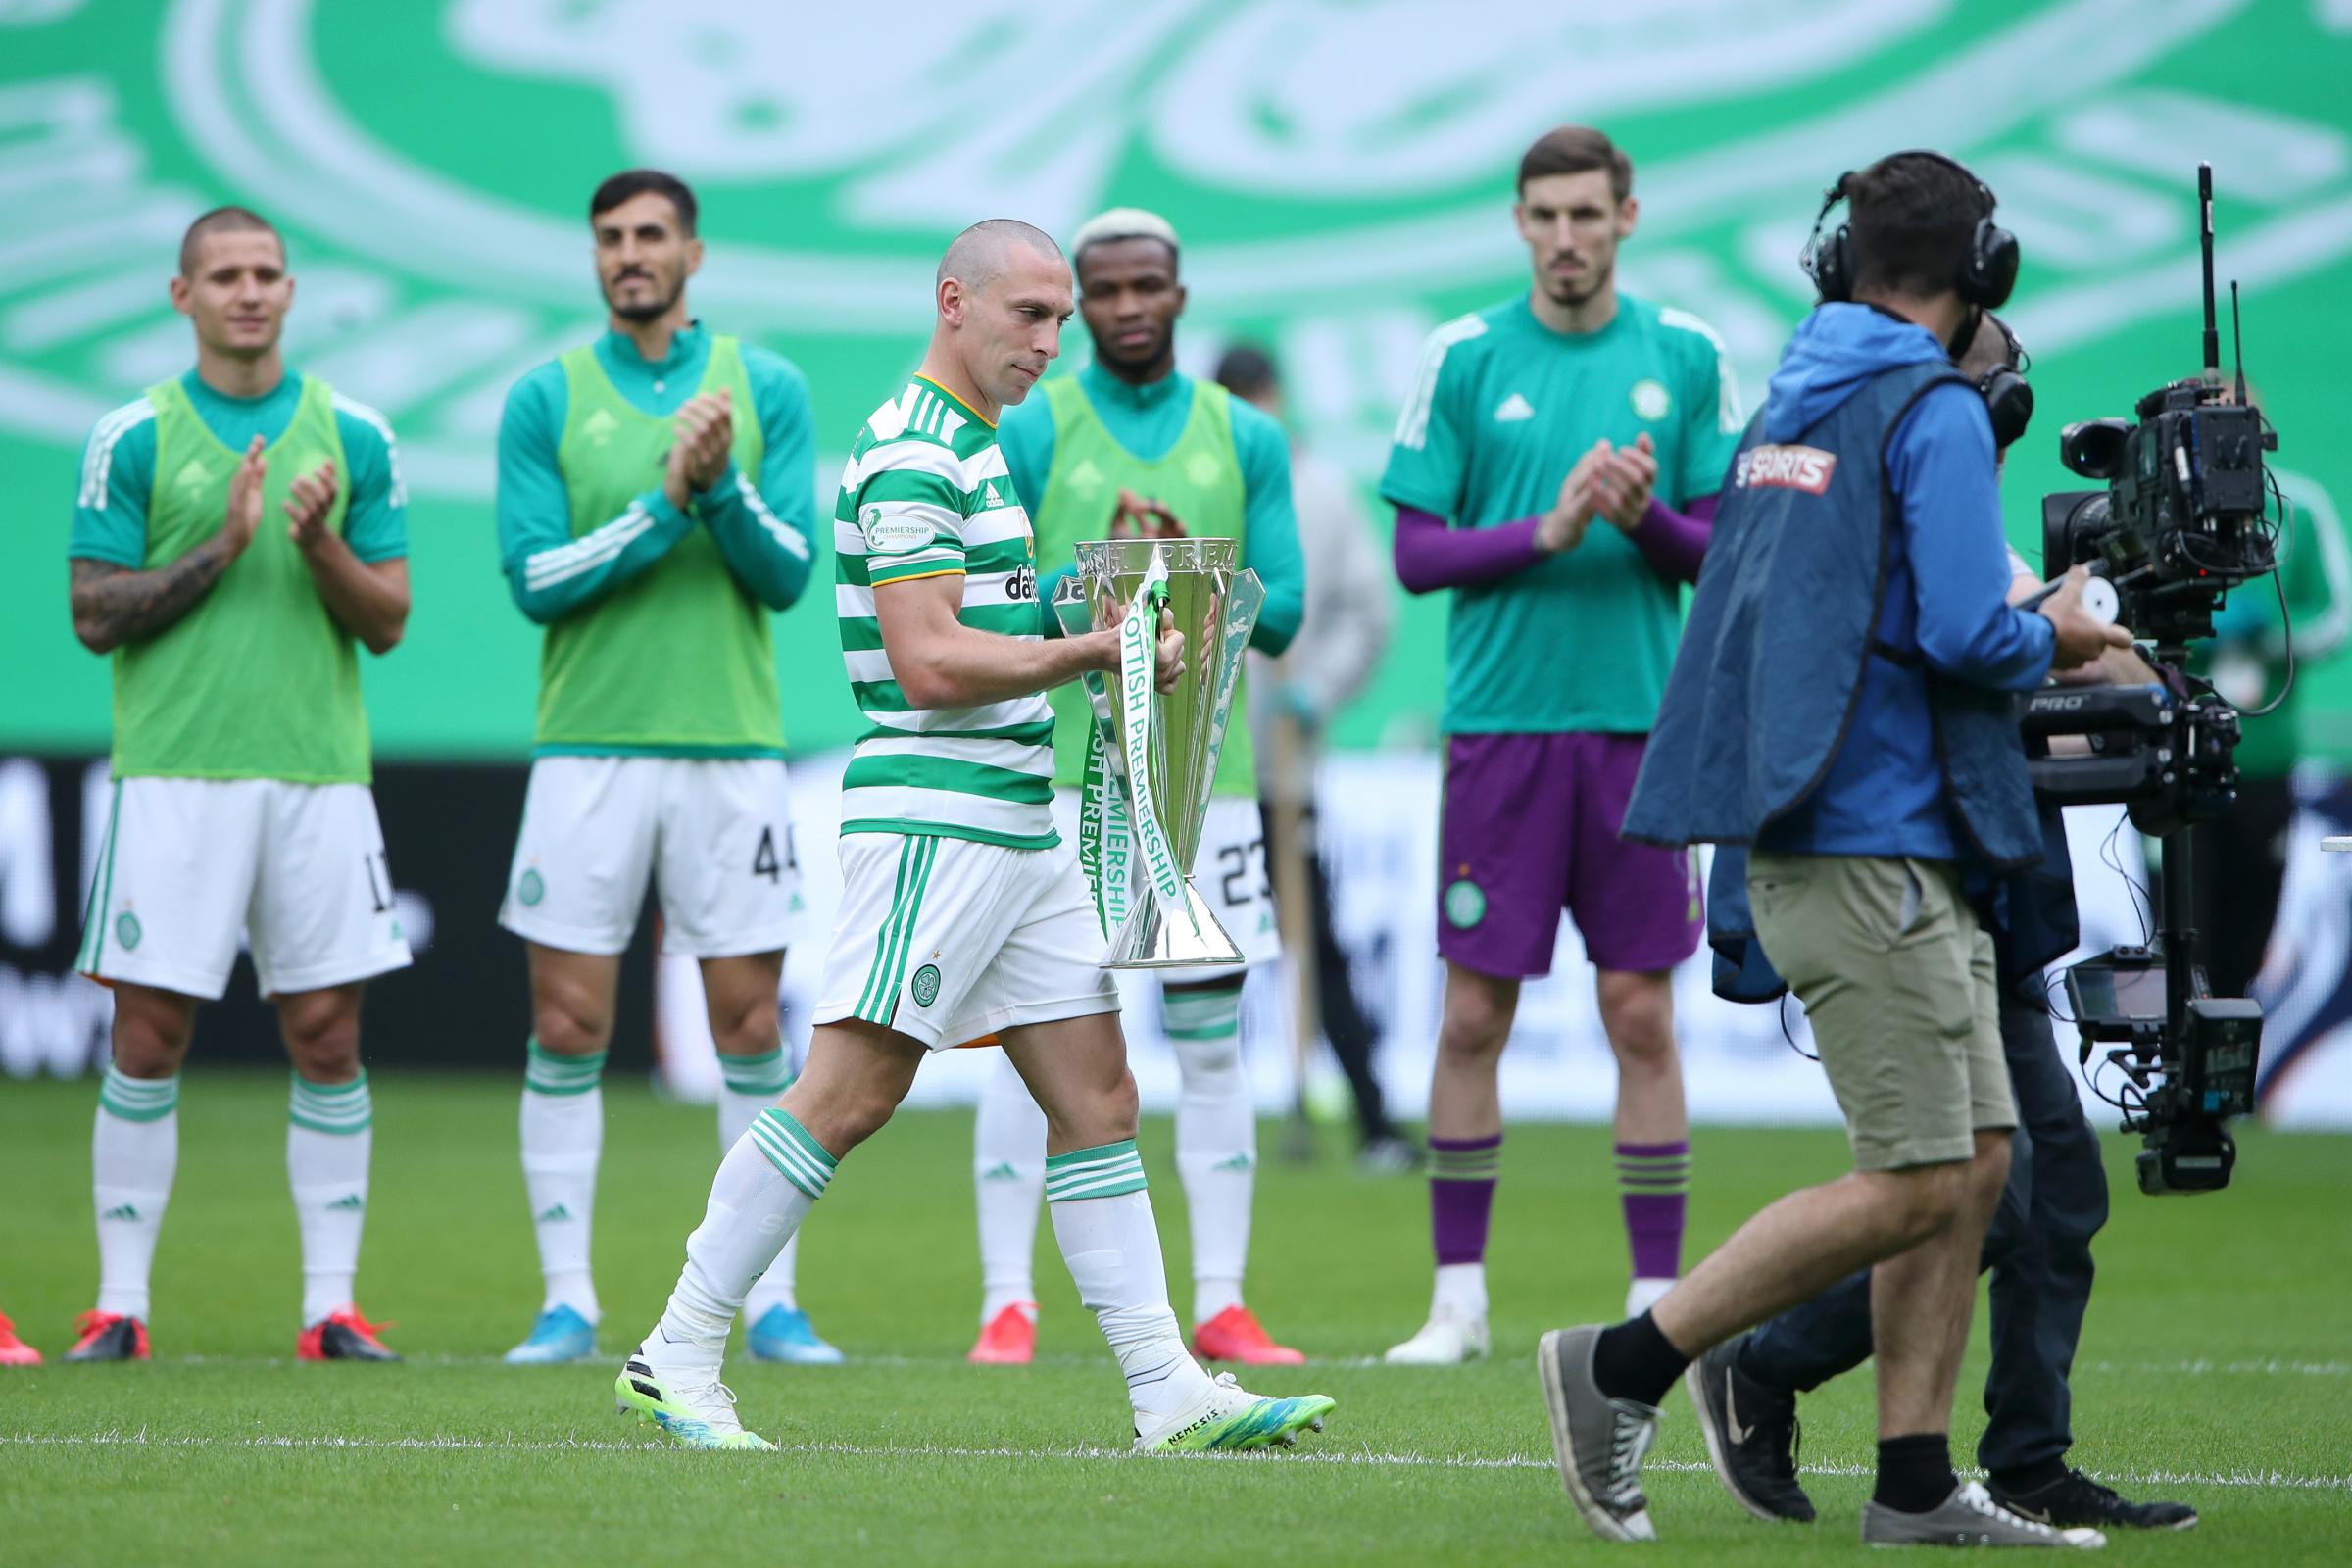 Covid-19 chaos shows the SPFL were right to curtail the 2019/20 Premiership season